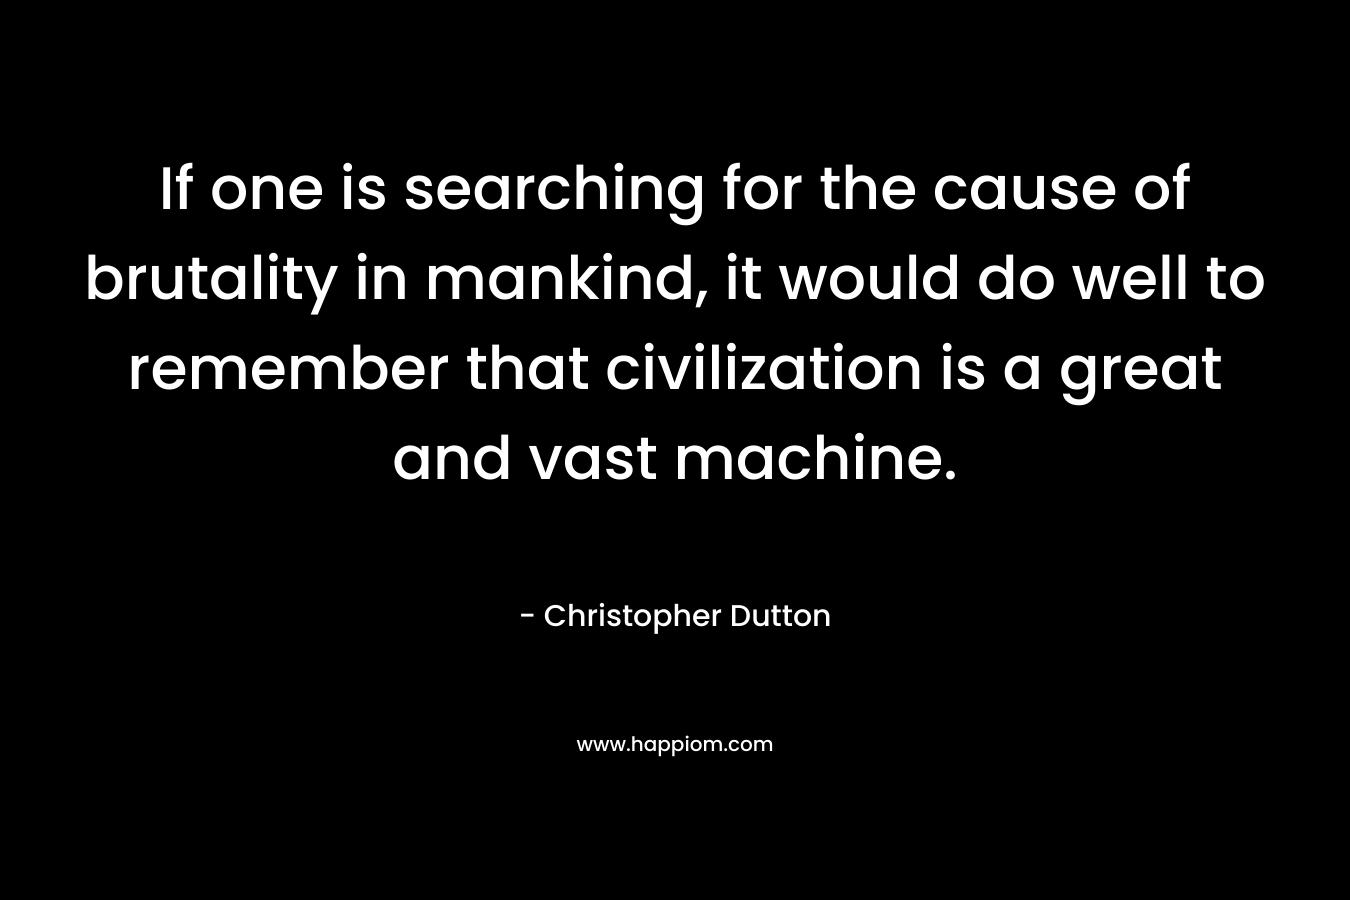 If one is searching for the cause of brutality in mankind, it would do well to remember that civilization is a great and vast machine.